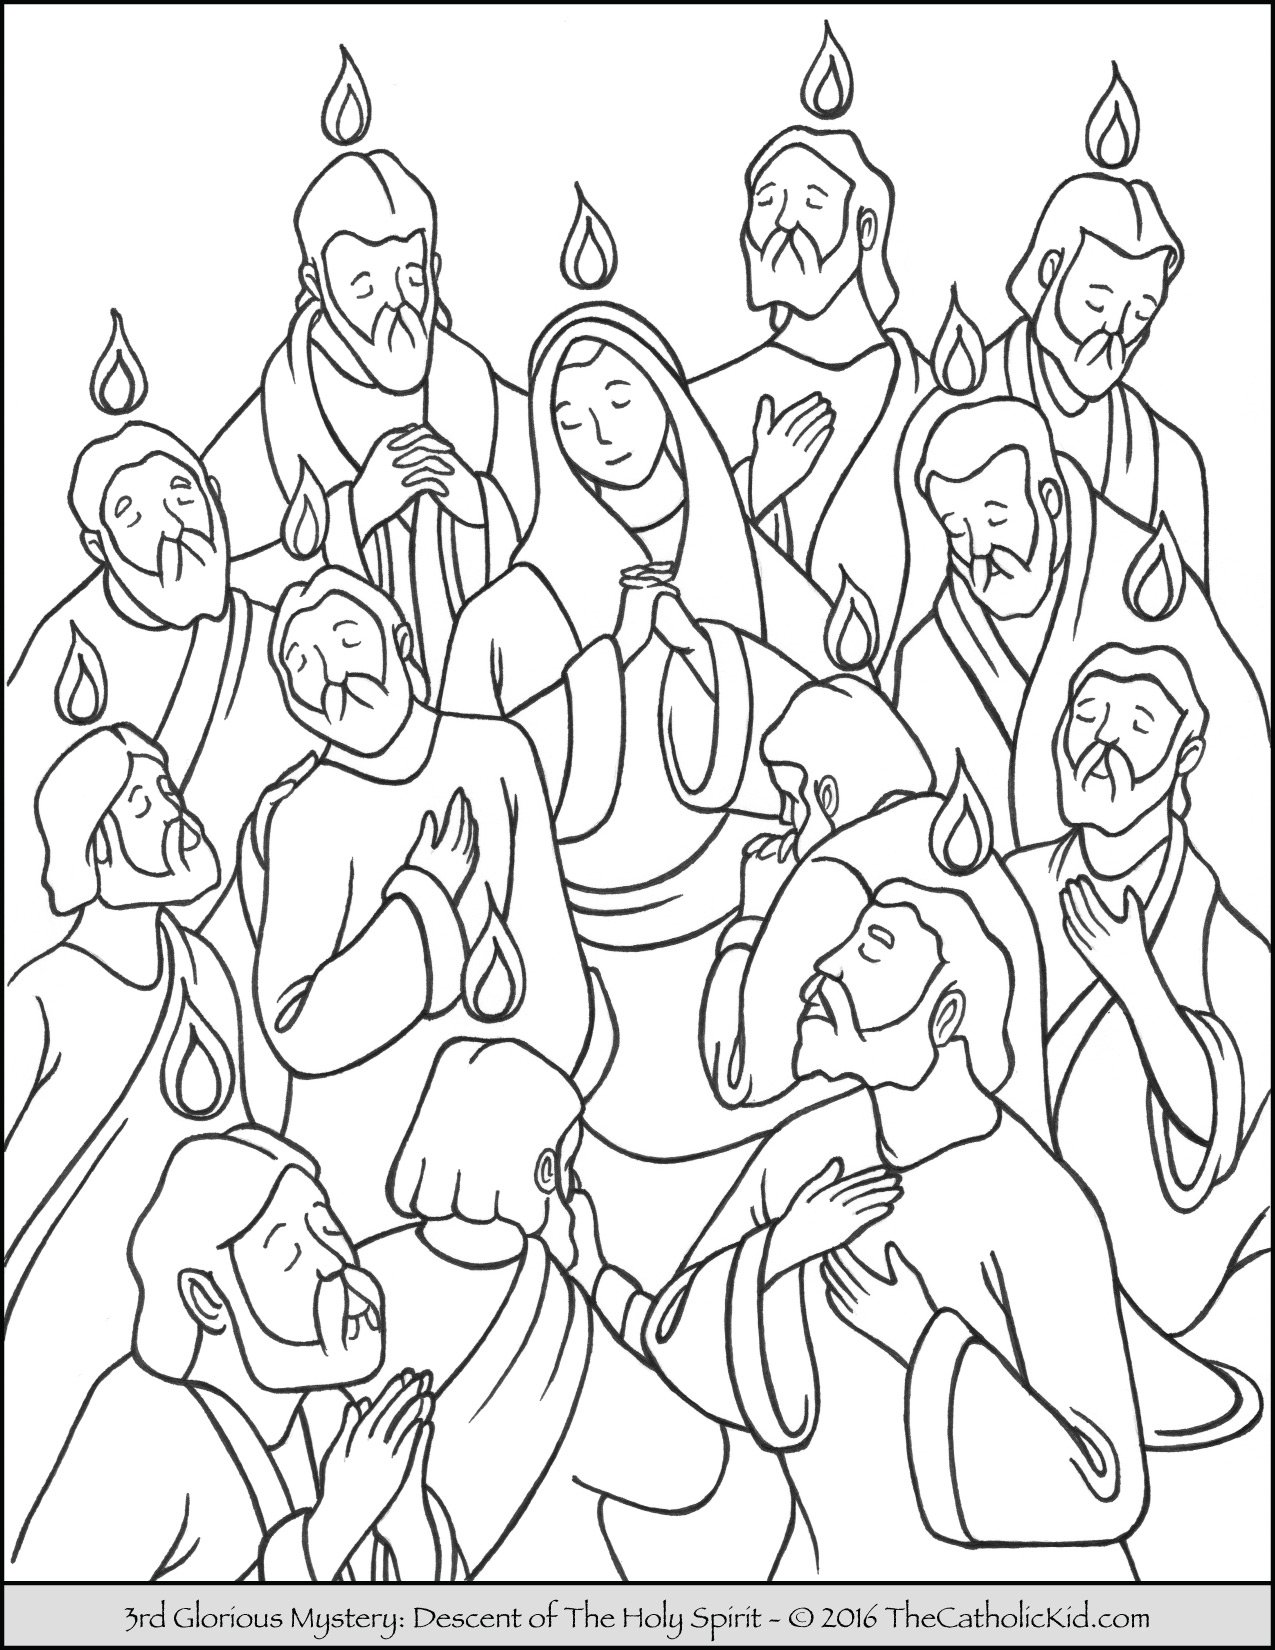 Sacrament of confirmation coloring pages download pack